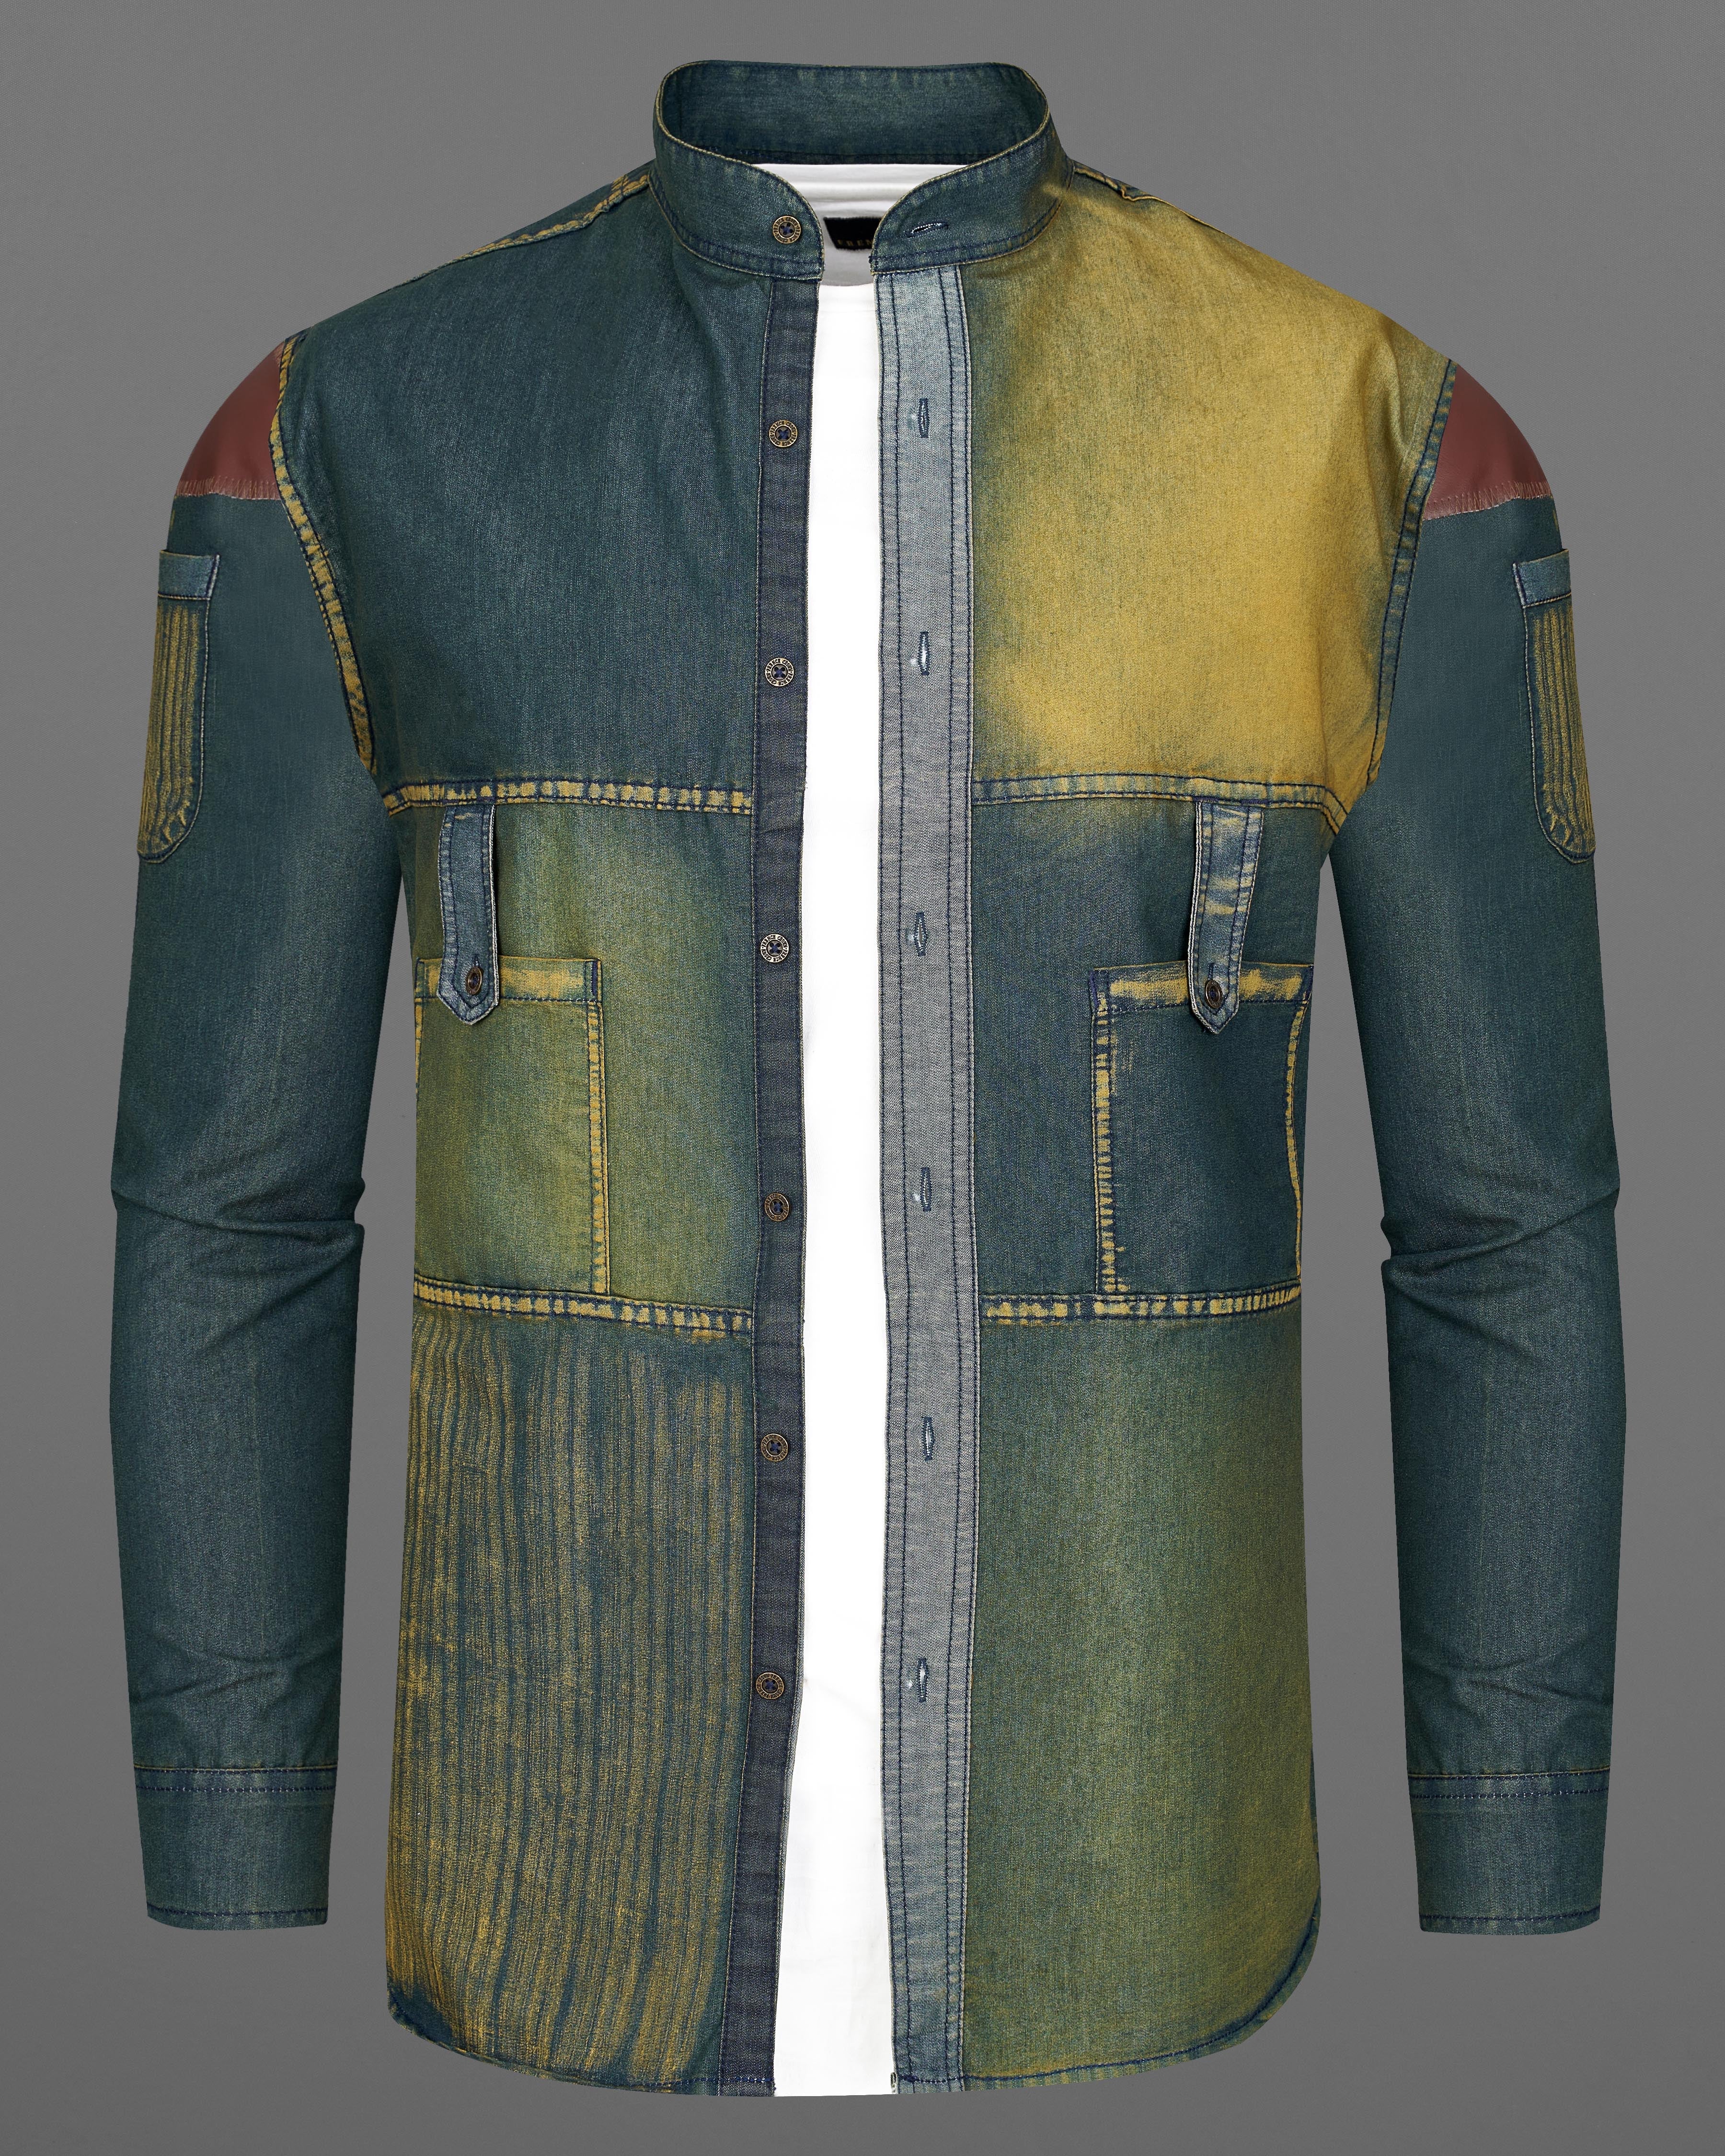 Limed Spruce Blue with Husk Yellow Denim Shirt With Leather Patch Work 9207-M-MB-38,9207-M-MB-H-38,9207-M-MB-39,9207-M-MB-H-39,9207-M-MB-40,9207-M-MB-H-40,9207-M-MB-42,9207-M-MB-H-42,9207-M-MB-44,9207-M-MB-H-44,9207-M-MB-46,9207-M-MB-H-46,9207-M-MB-48,9207-M-MB-H-48,9207-M-MB-50,9207-M-MB-H-50,9207-M-MB-52,9207-M-MB-H-52